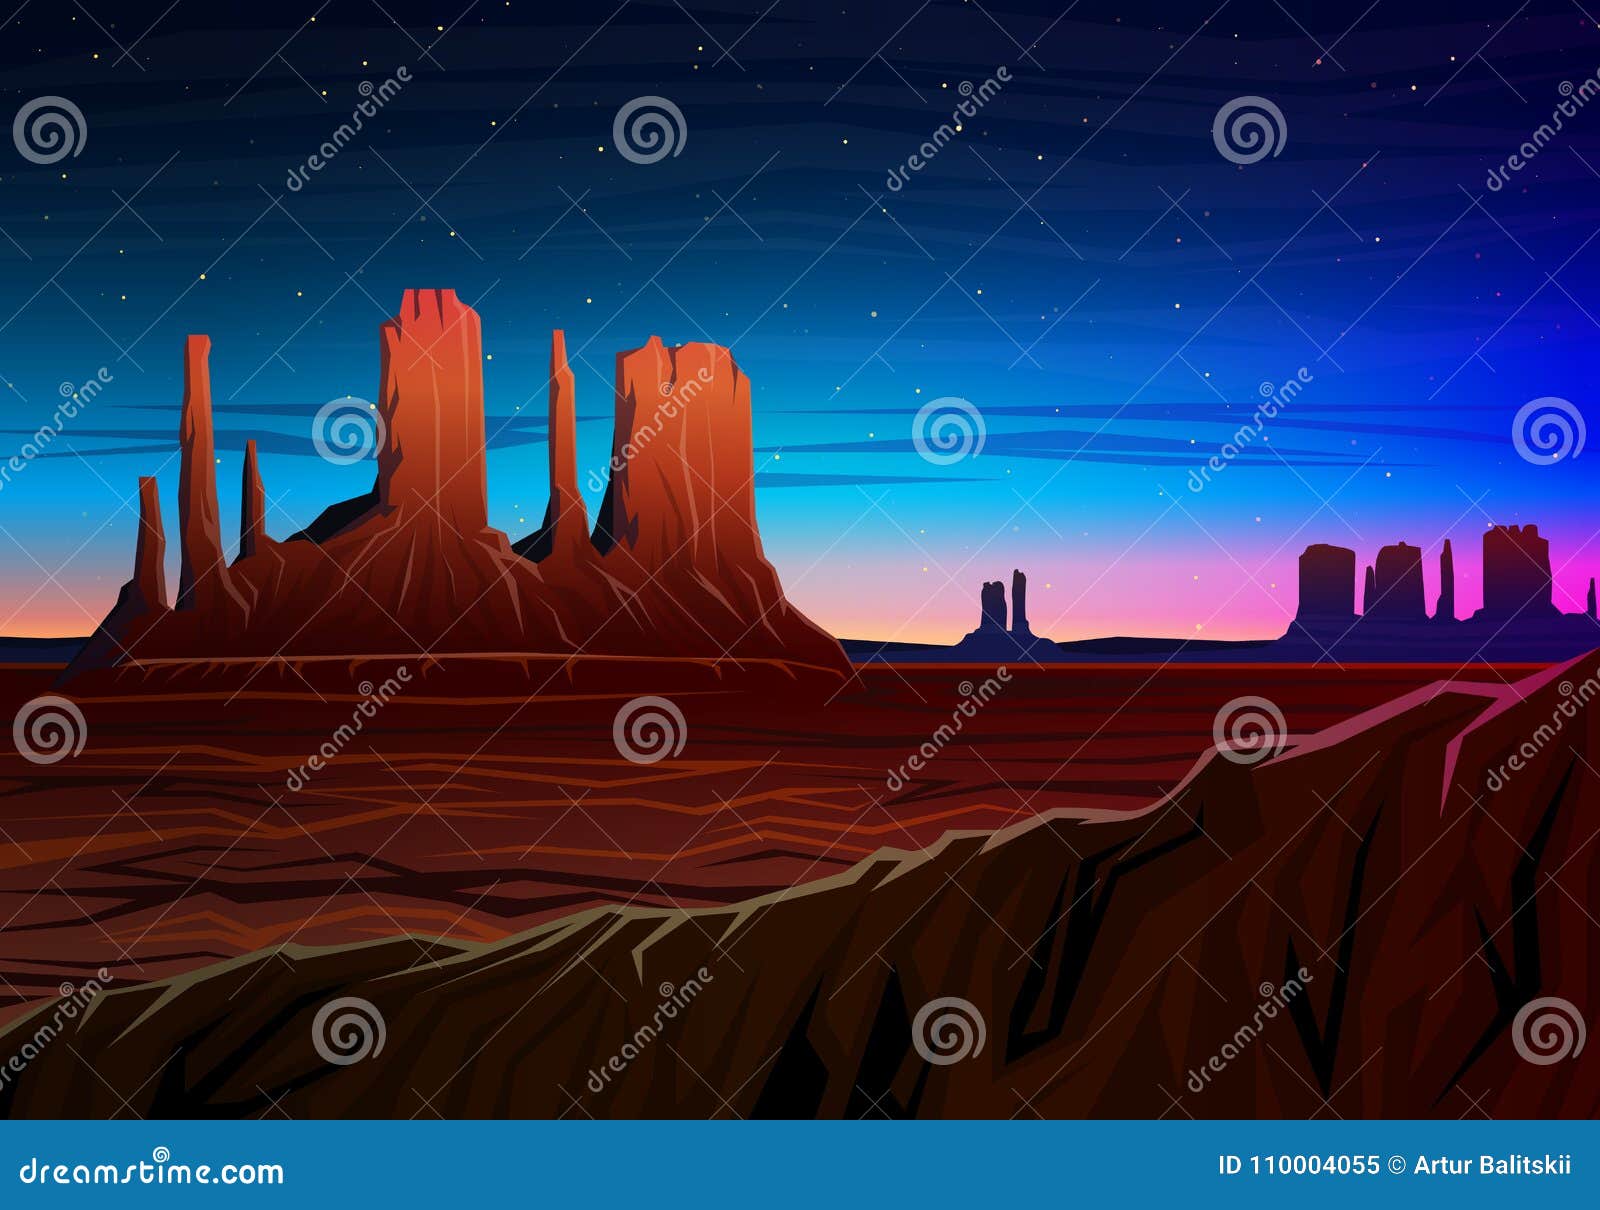 mountain and monument valley, night panoramic view, peaks, landscape early in daylight. travel or camping, climbing